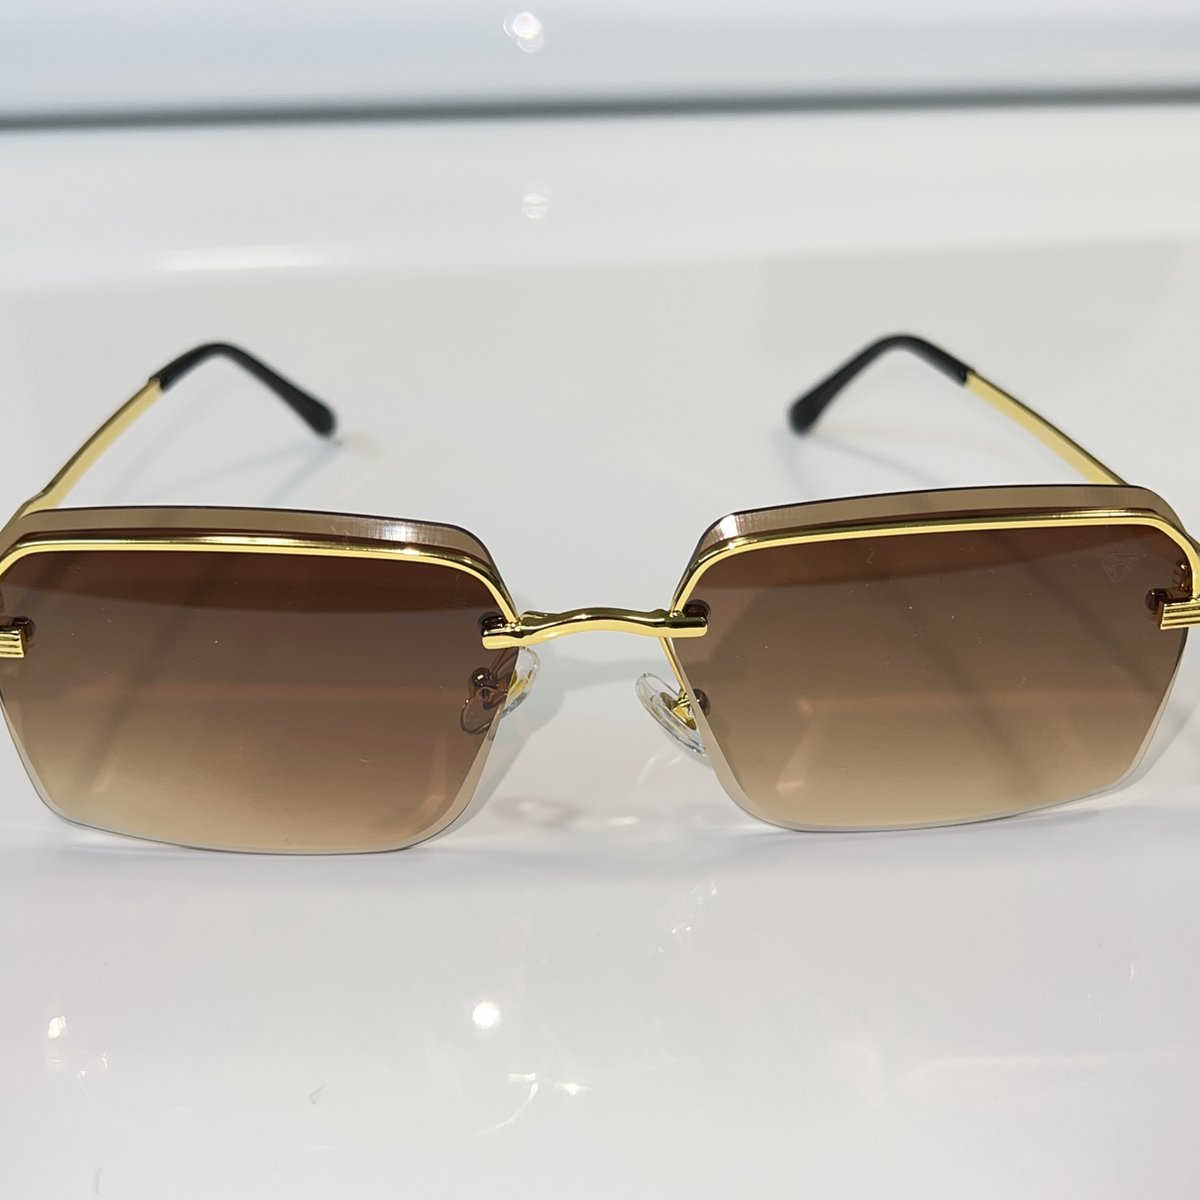 Sehgal Invincible Glasses - 14 carat gold plated - Brown shade - Sehgal Juwelier